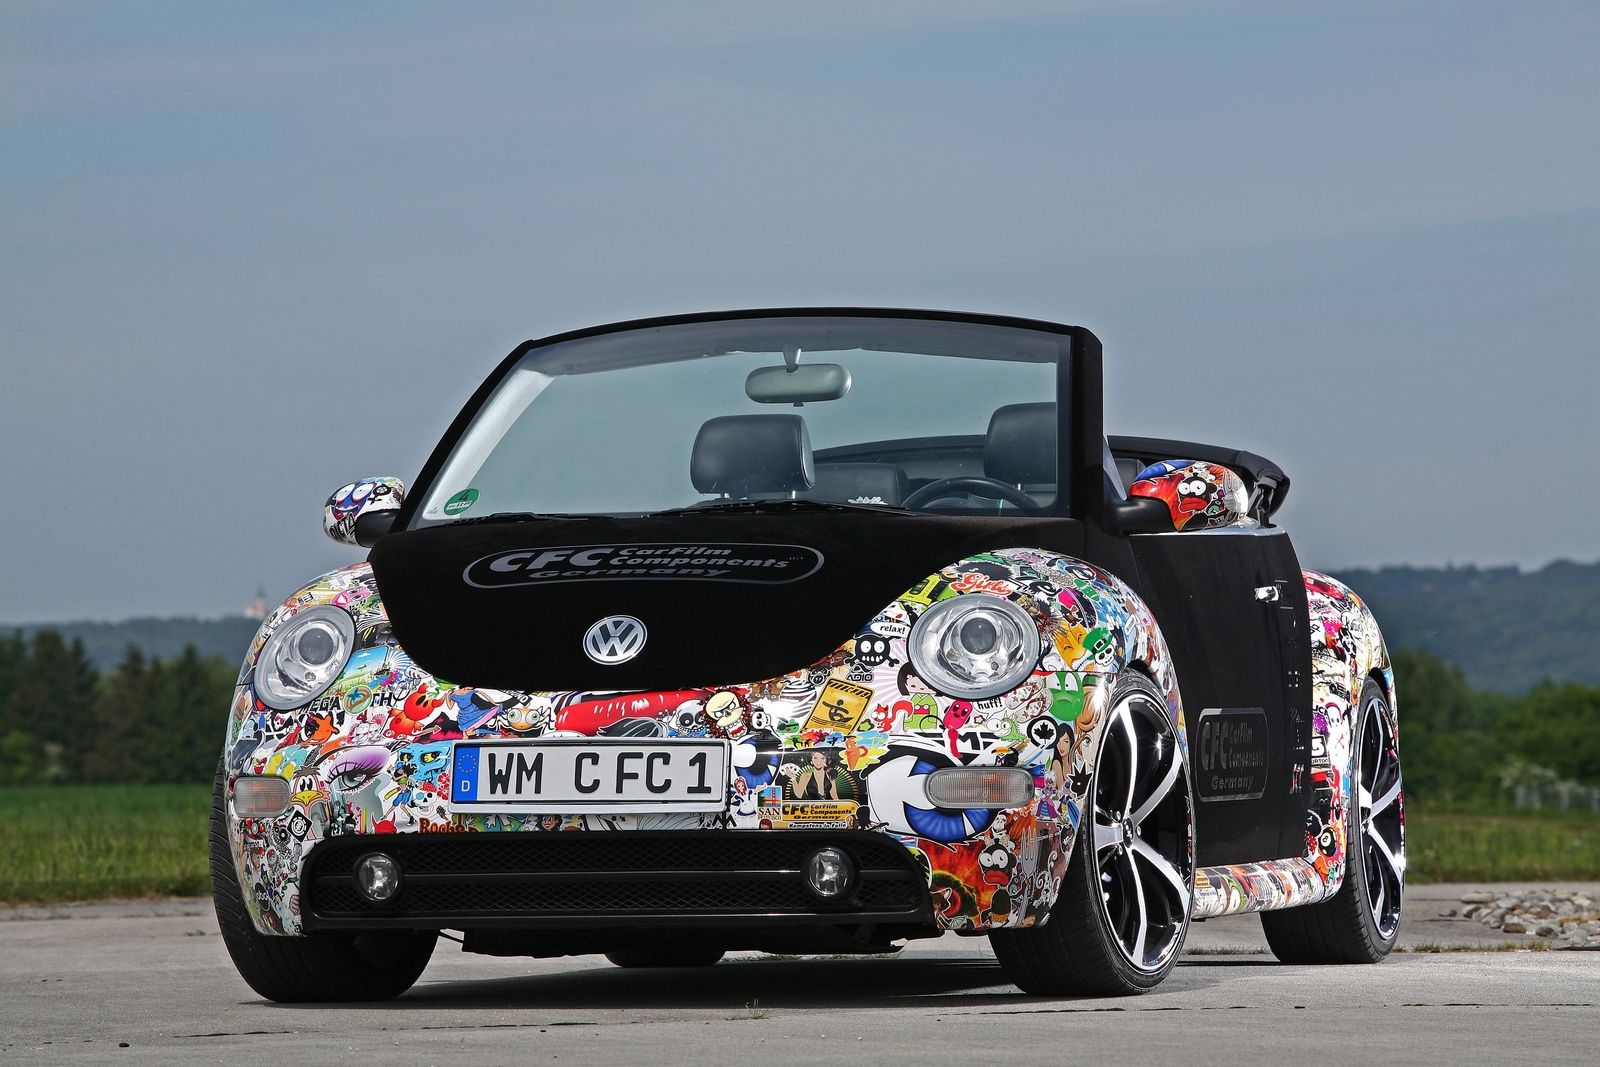 sticker bombed BMW outdoors